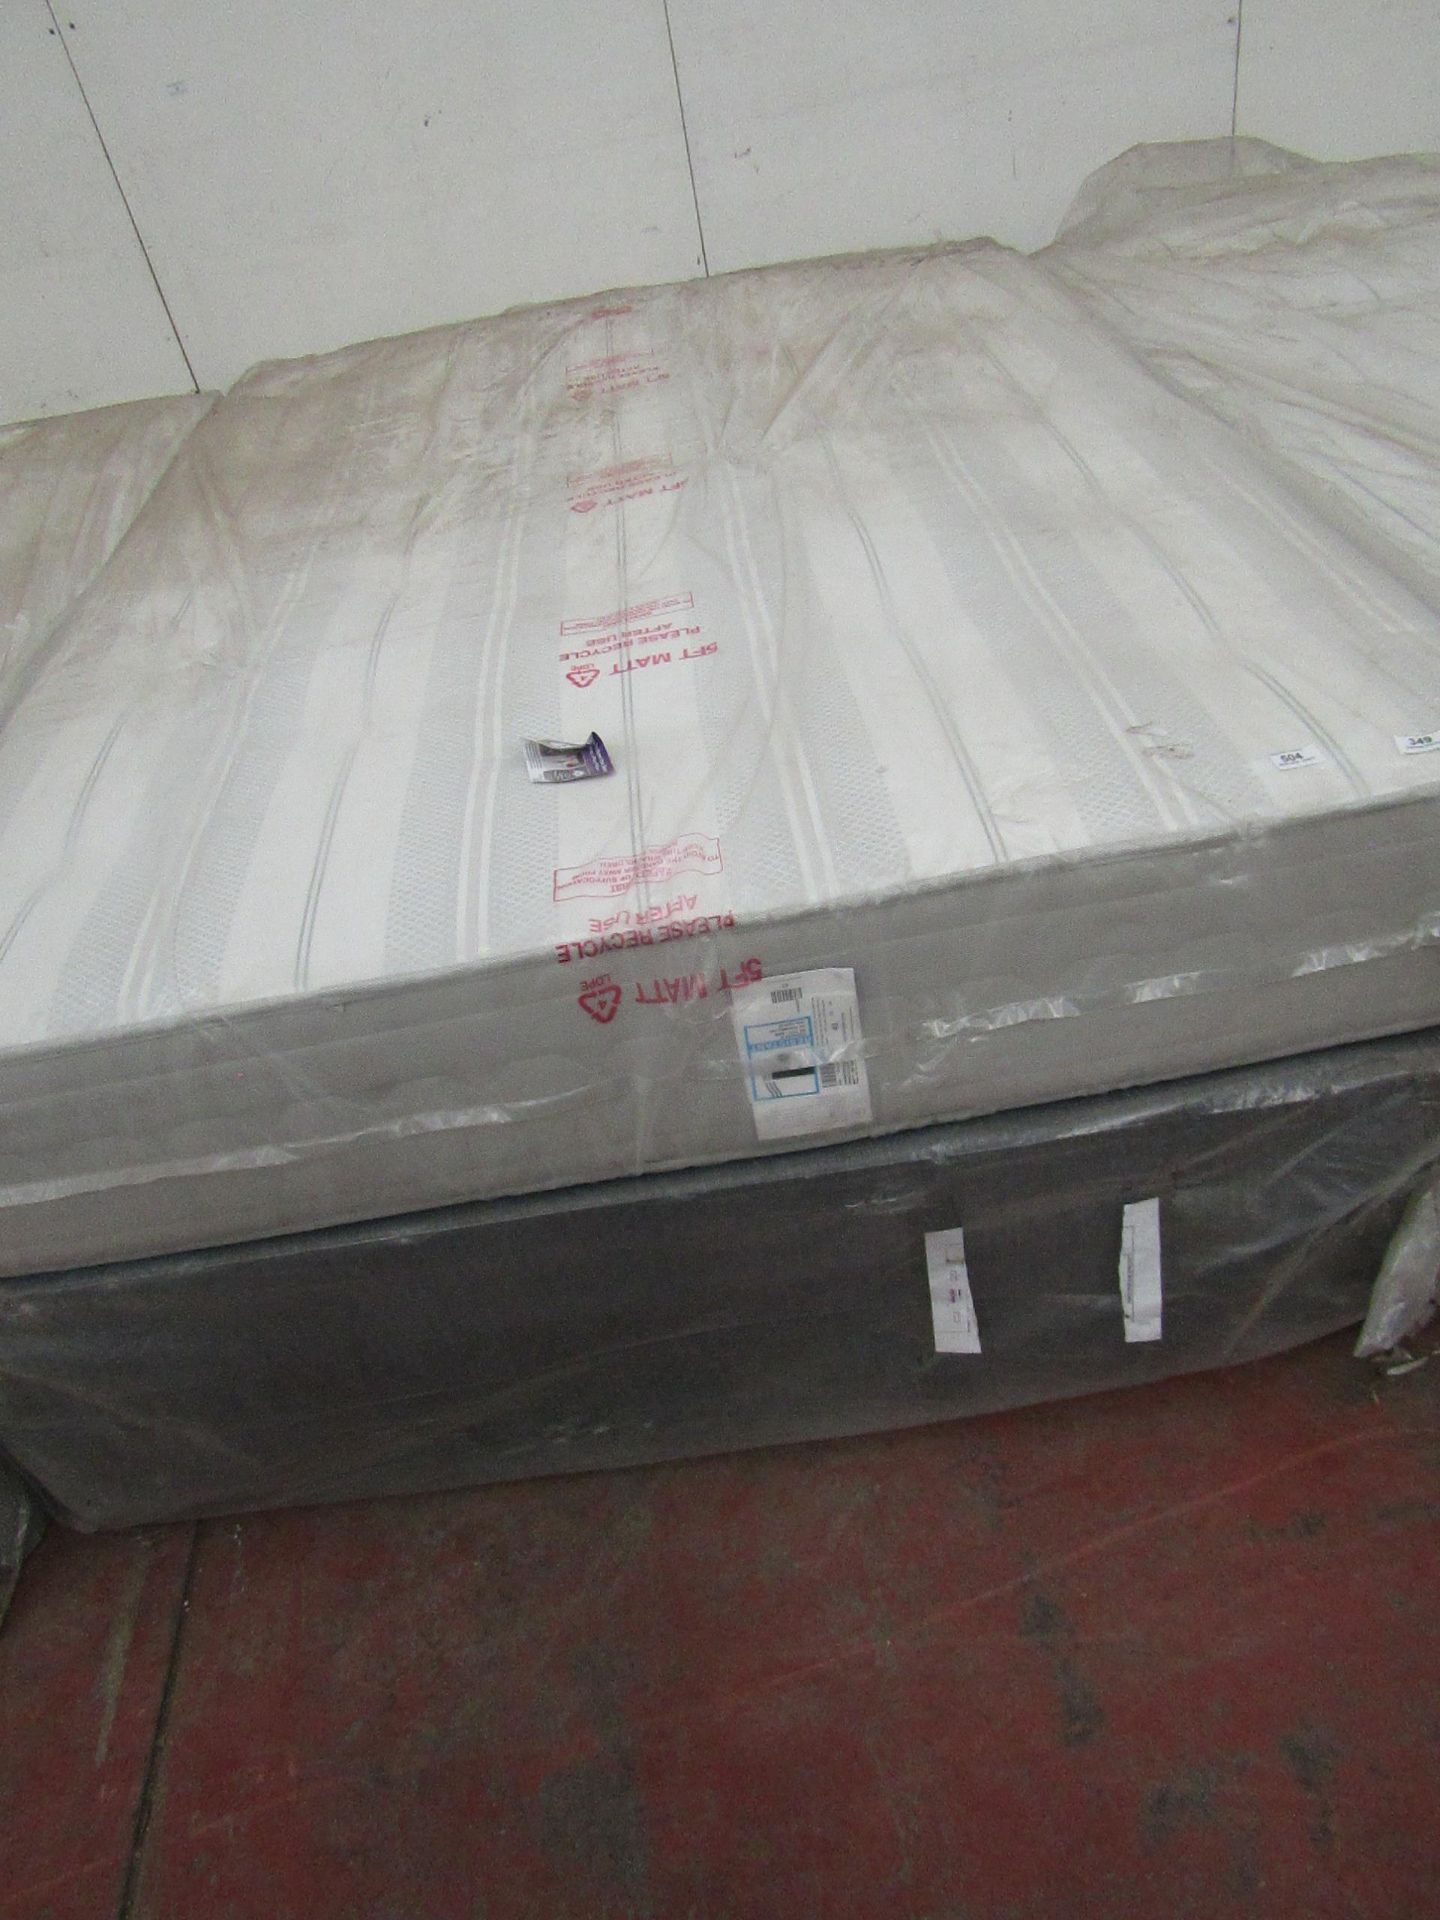 Vancouver kingsize mattress with divan base, ex-display so item may contain a few marks etc